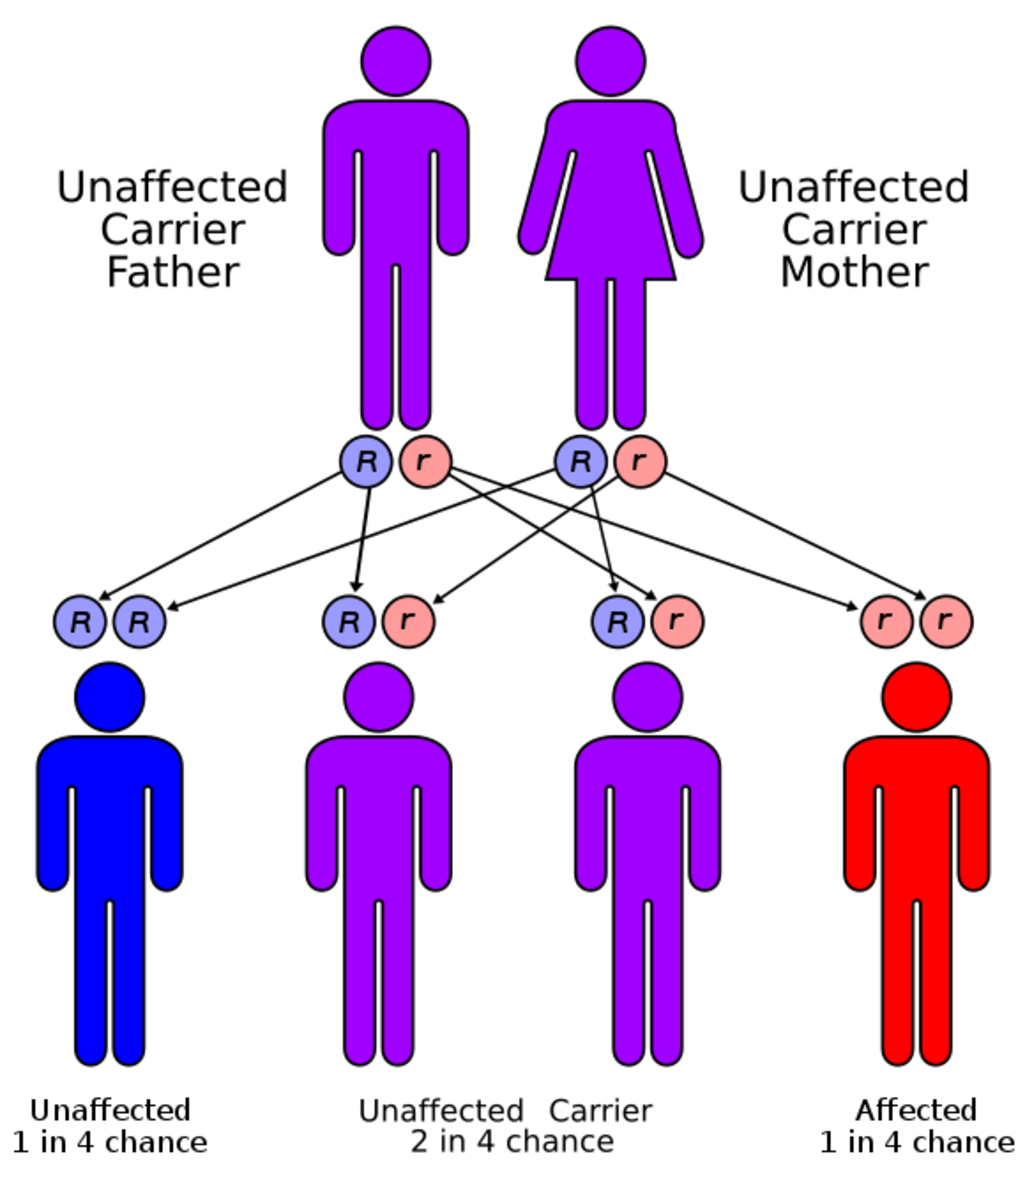 Cystic fibrosis has an autosomal recessive pattern of inheritance. 